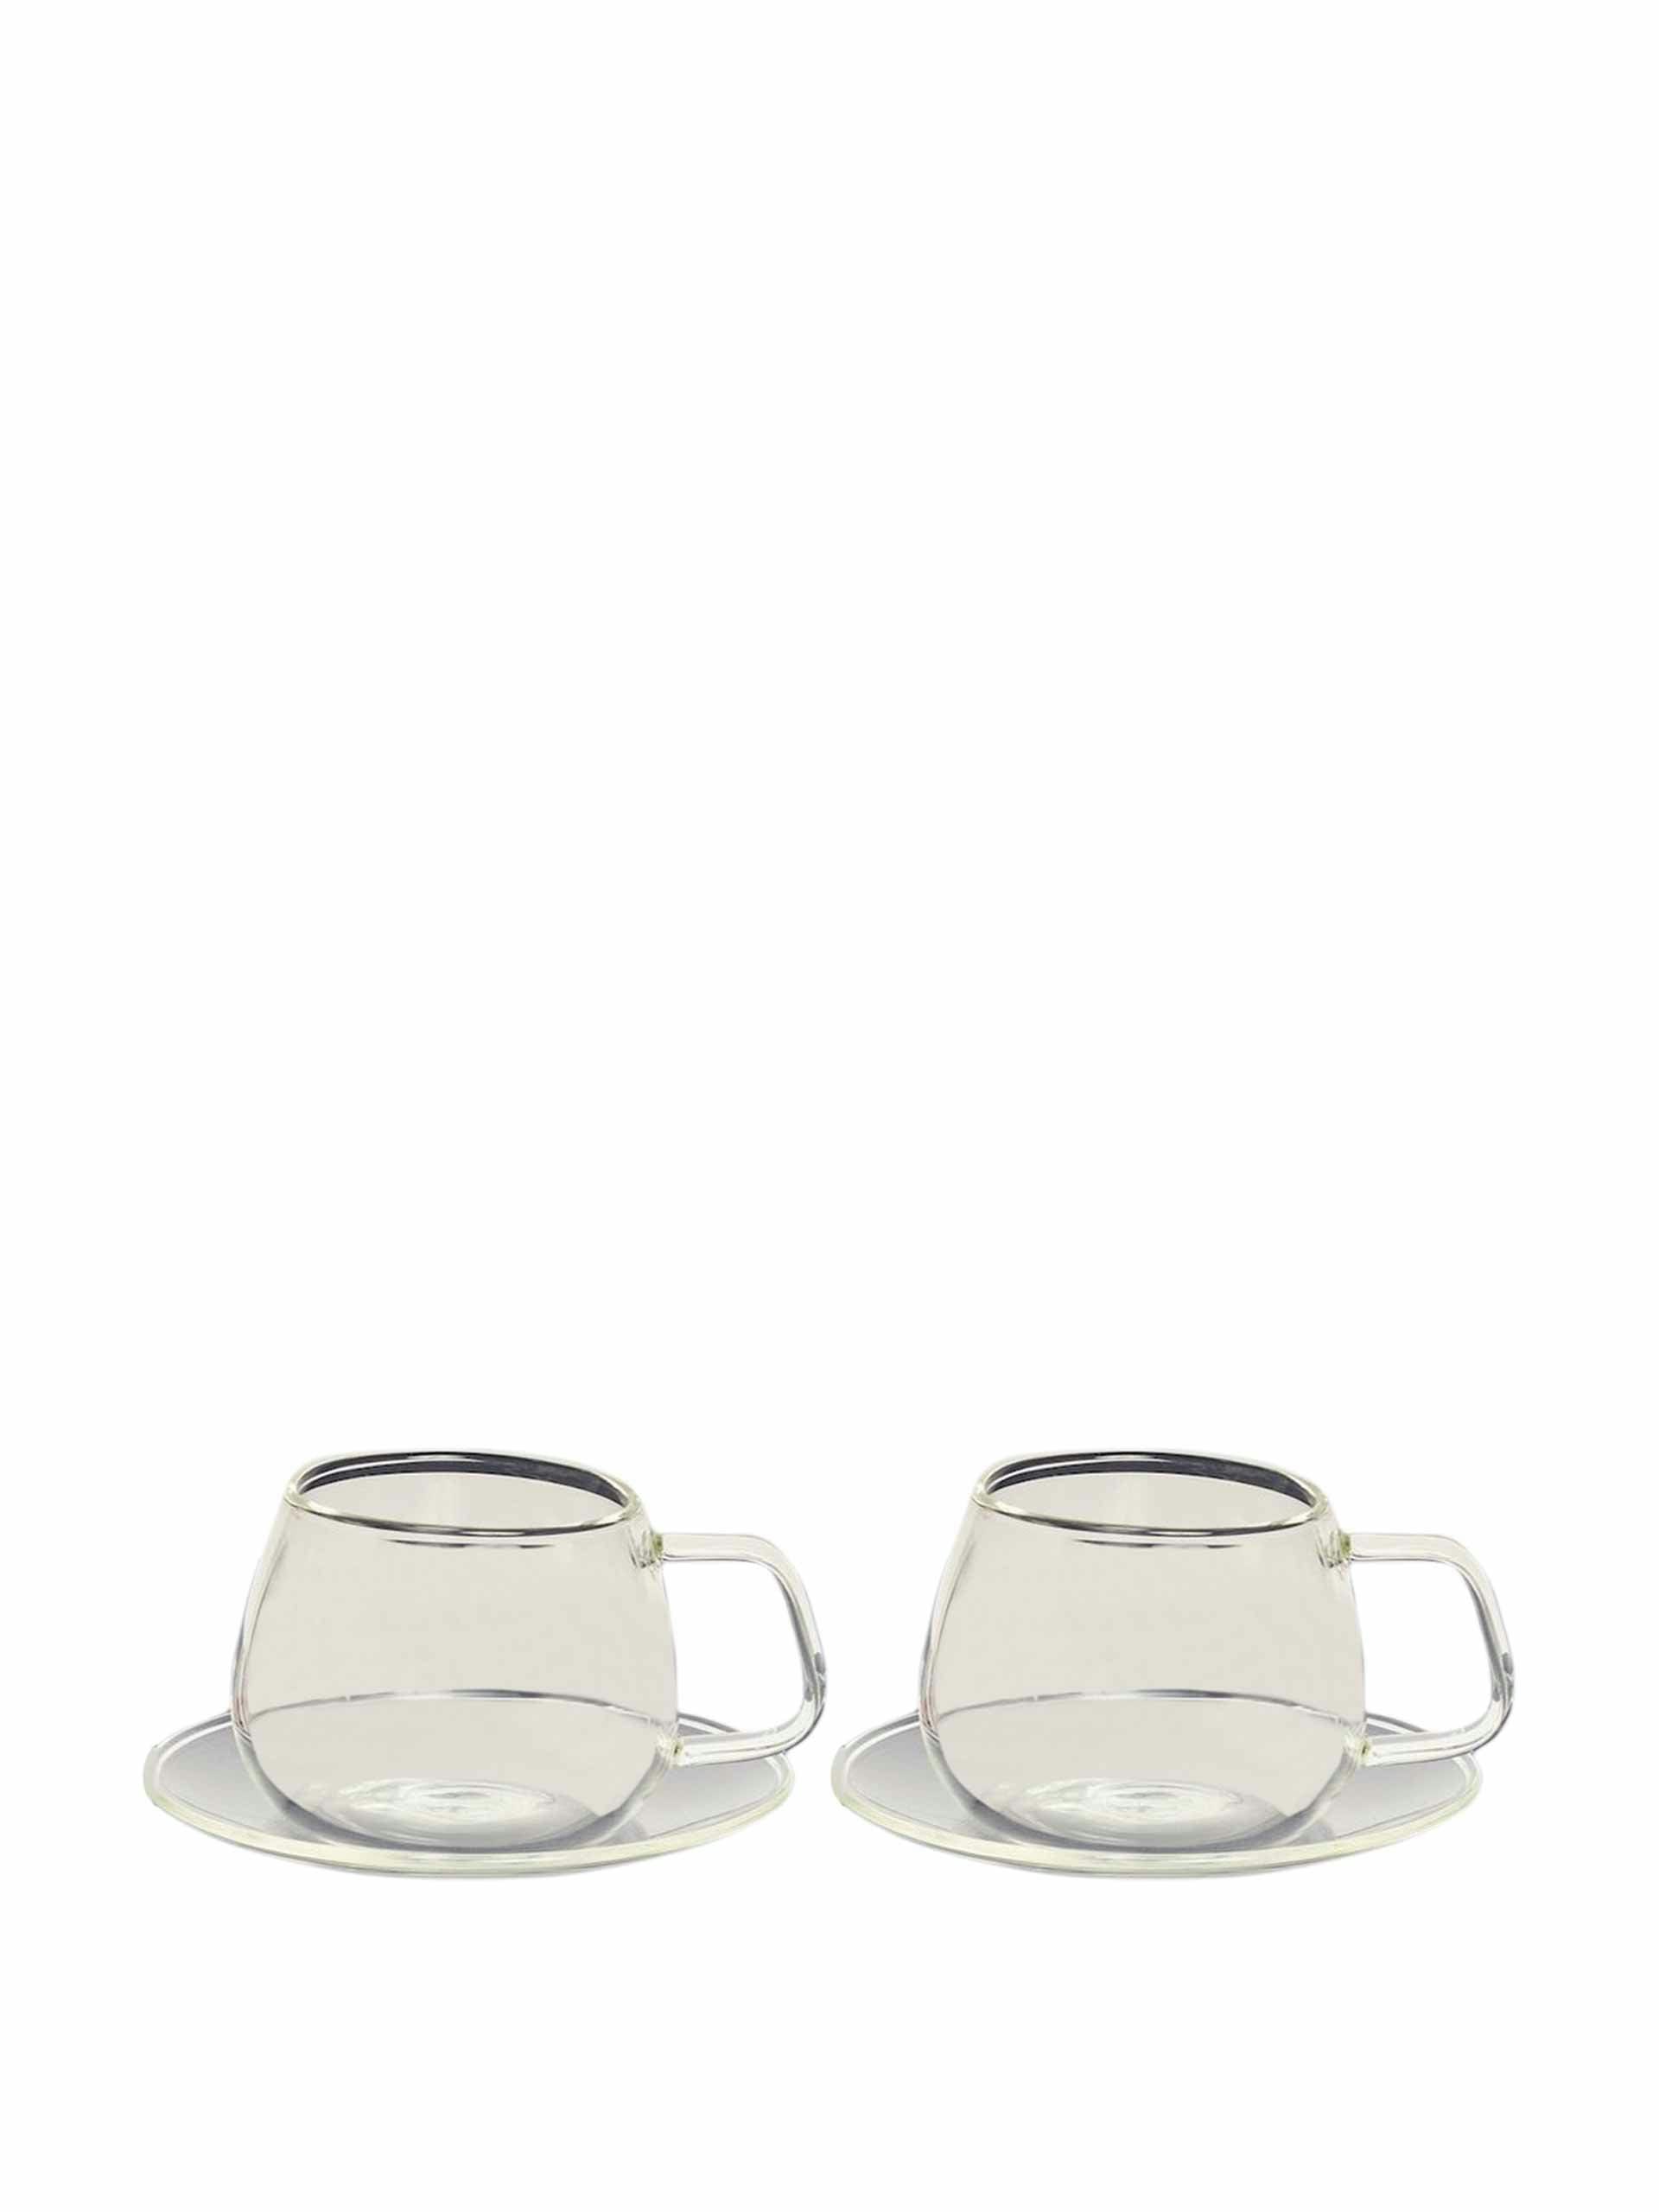 Glass cup and saucer set of 2